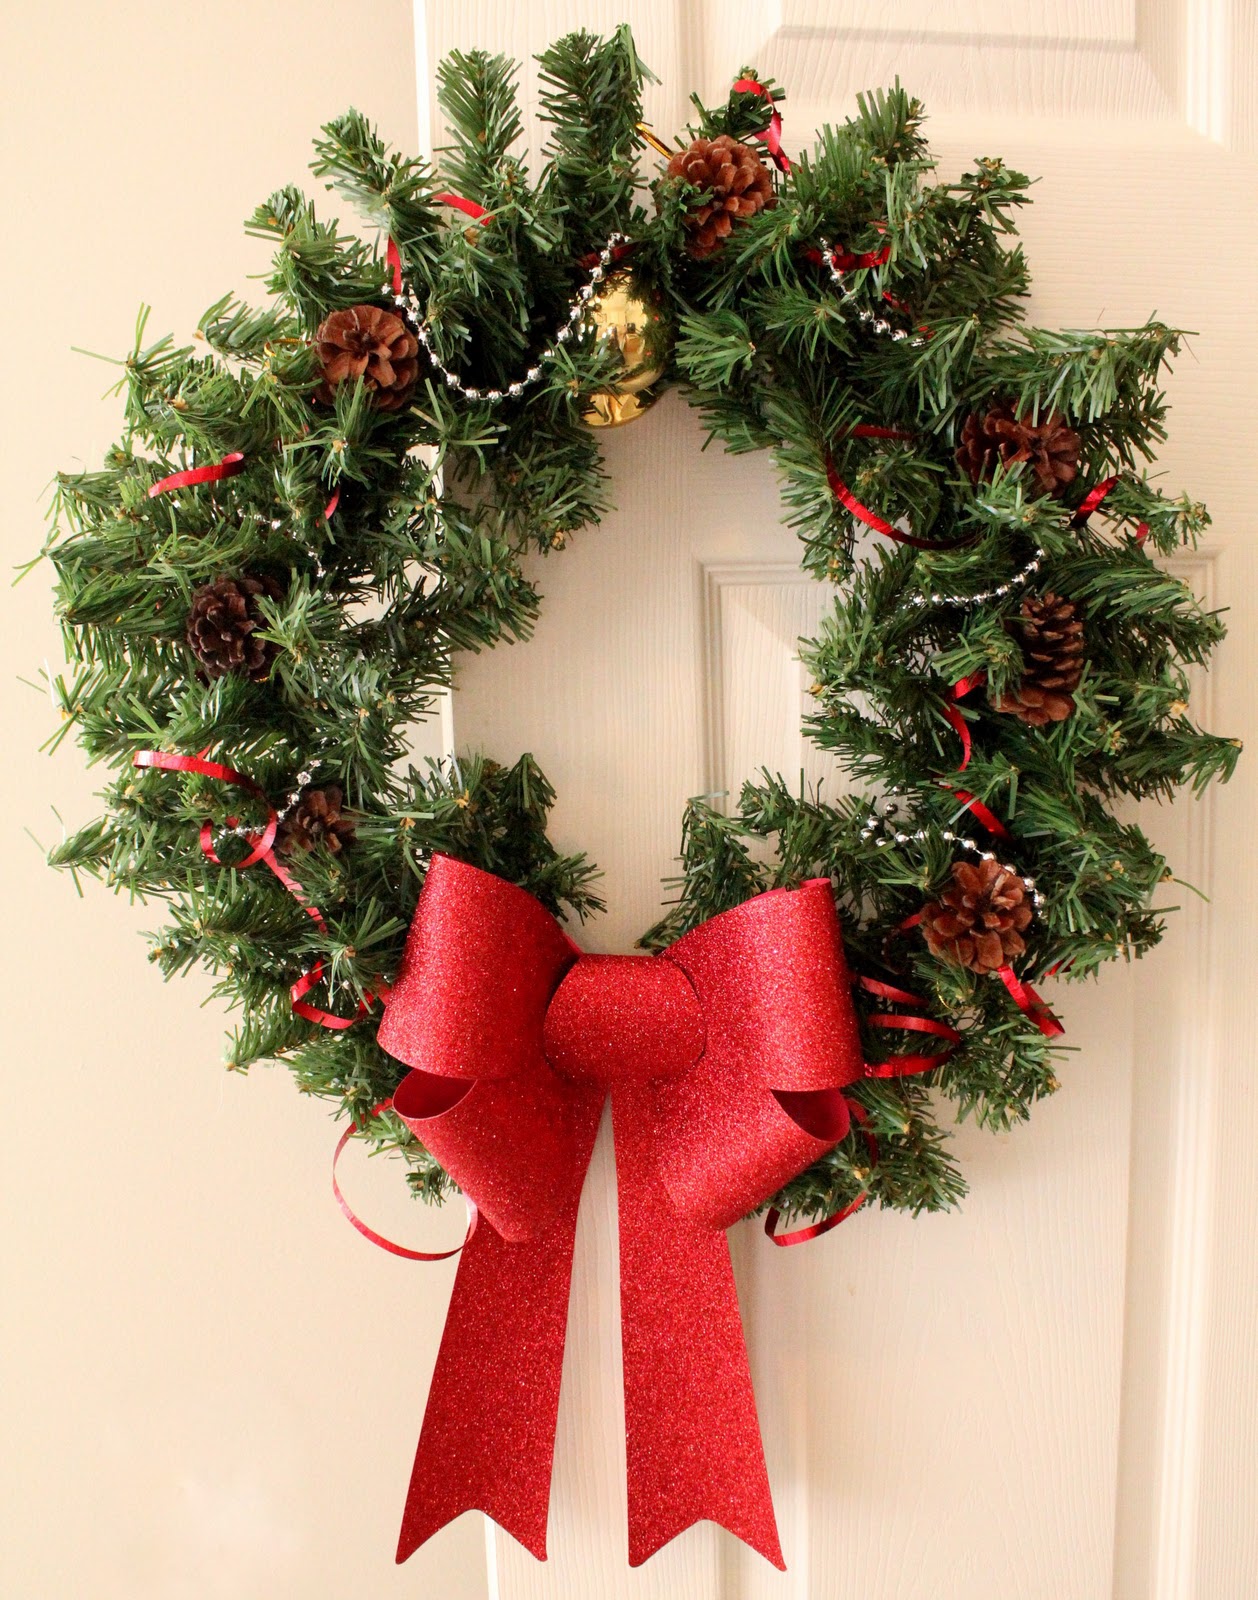 Turtles and Tails: Boughs and Bows (Christmas Wreaths)